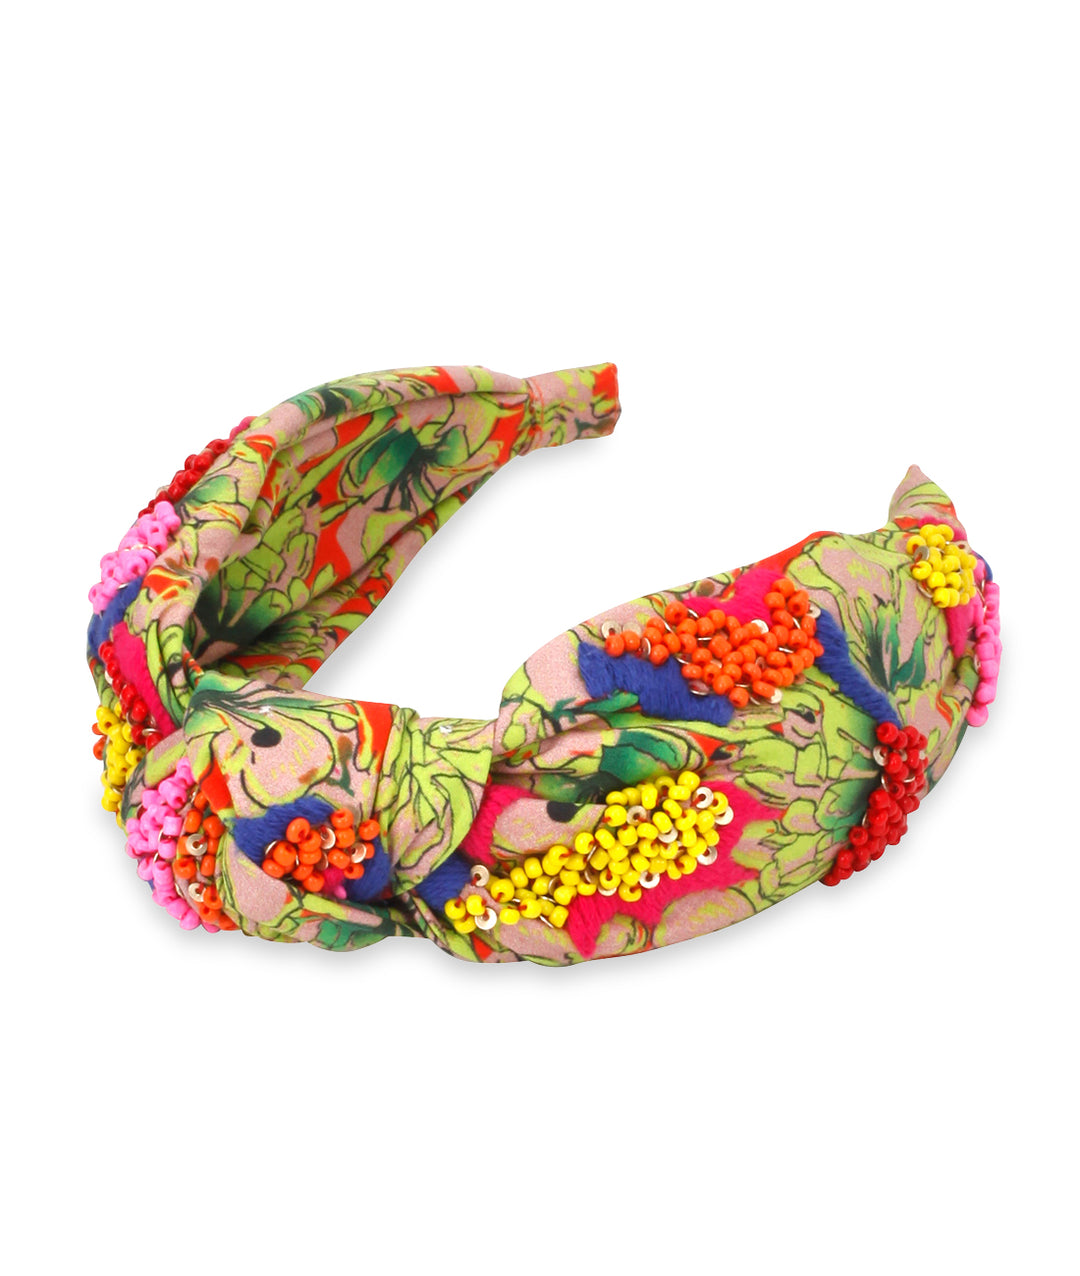 Embroidered Neon Recycled Cotton Headband